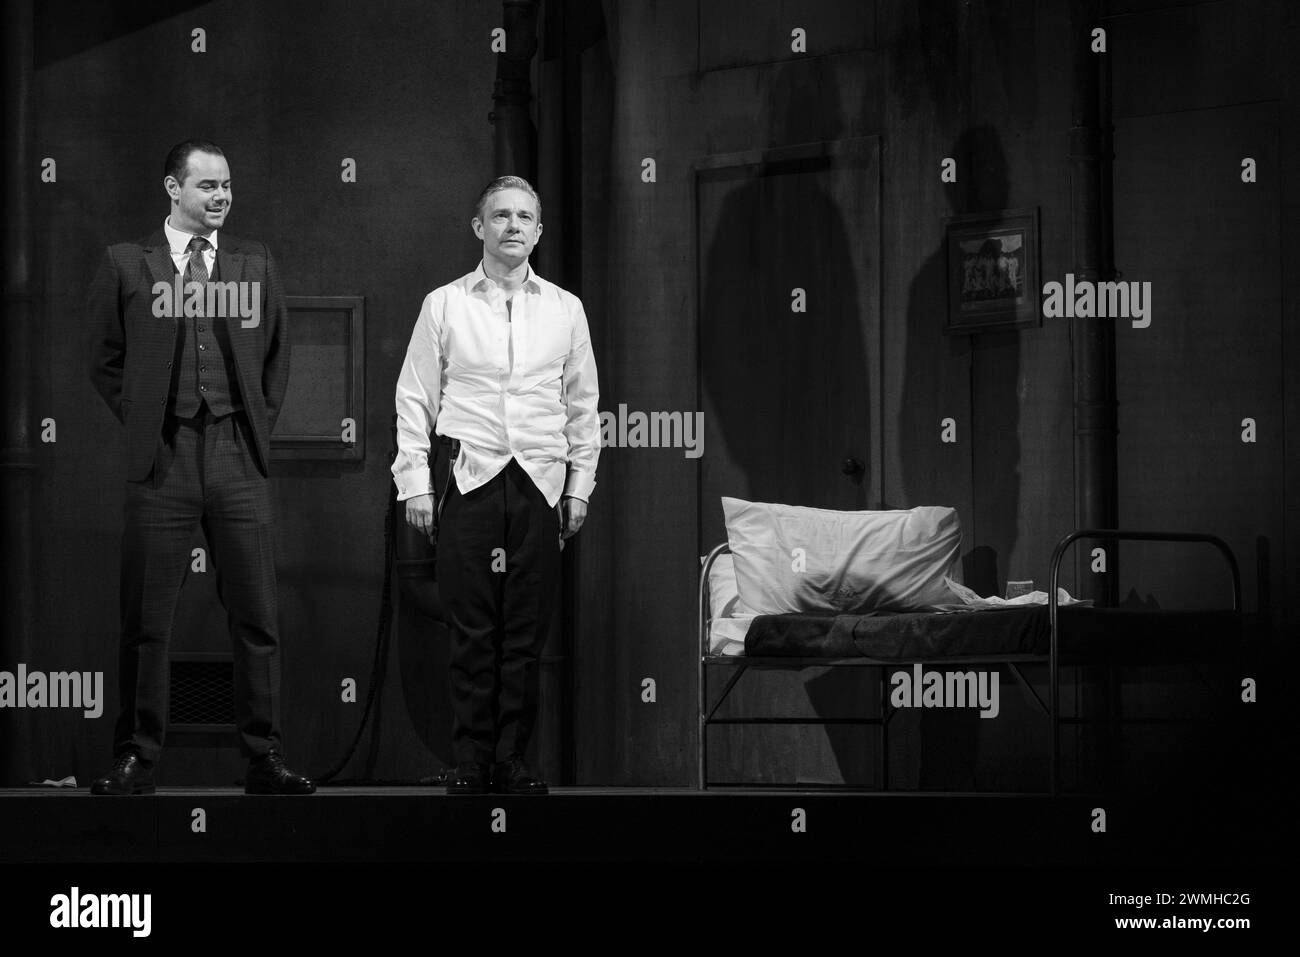 MARTIN FREEMAN, DANY DYER, PINTER PLAY, LONDON, 2019: Actors Martin Freeman and Danny Dyer in the early Harold Pinter play A Dumb Waiter (1958) take their curtain call on stage at the Pinter Theatre in London on 6 February 2019. Photo: Rob Watkins.  INFO: 'The Dumb Waiter' by Harold Pinter is a one-act play that delves into themes of existentialism and absurdity. Set in a basement, it follows two hitmen awaiting their next assignment, navigating cryptic messages from an unseen employer, leading to tension and existential questioning. Stock Photo